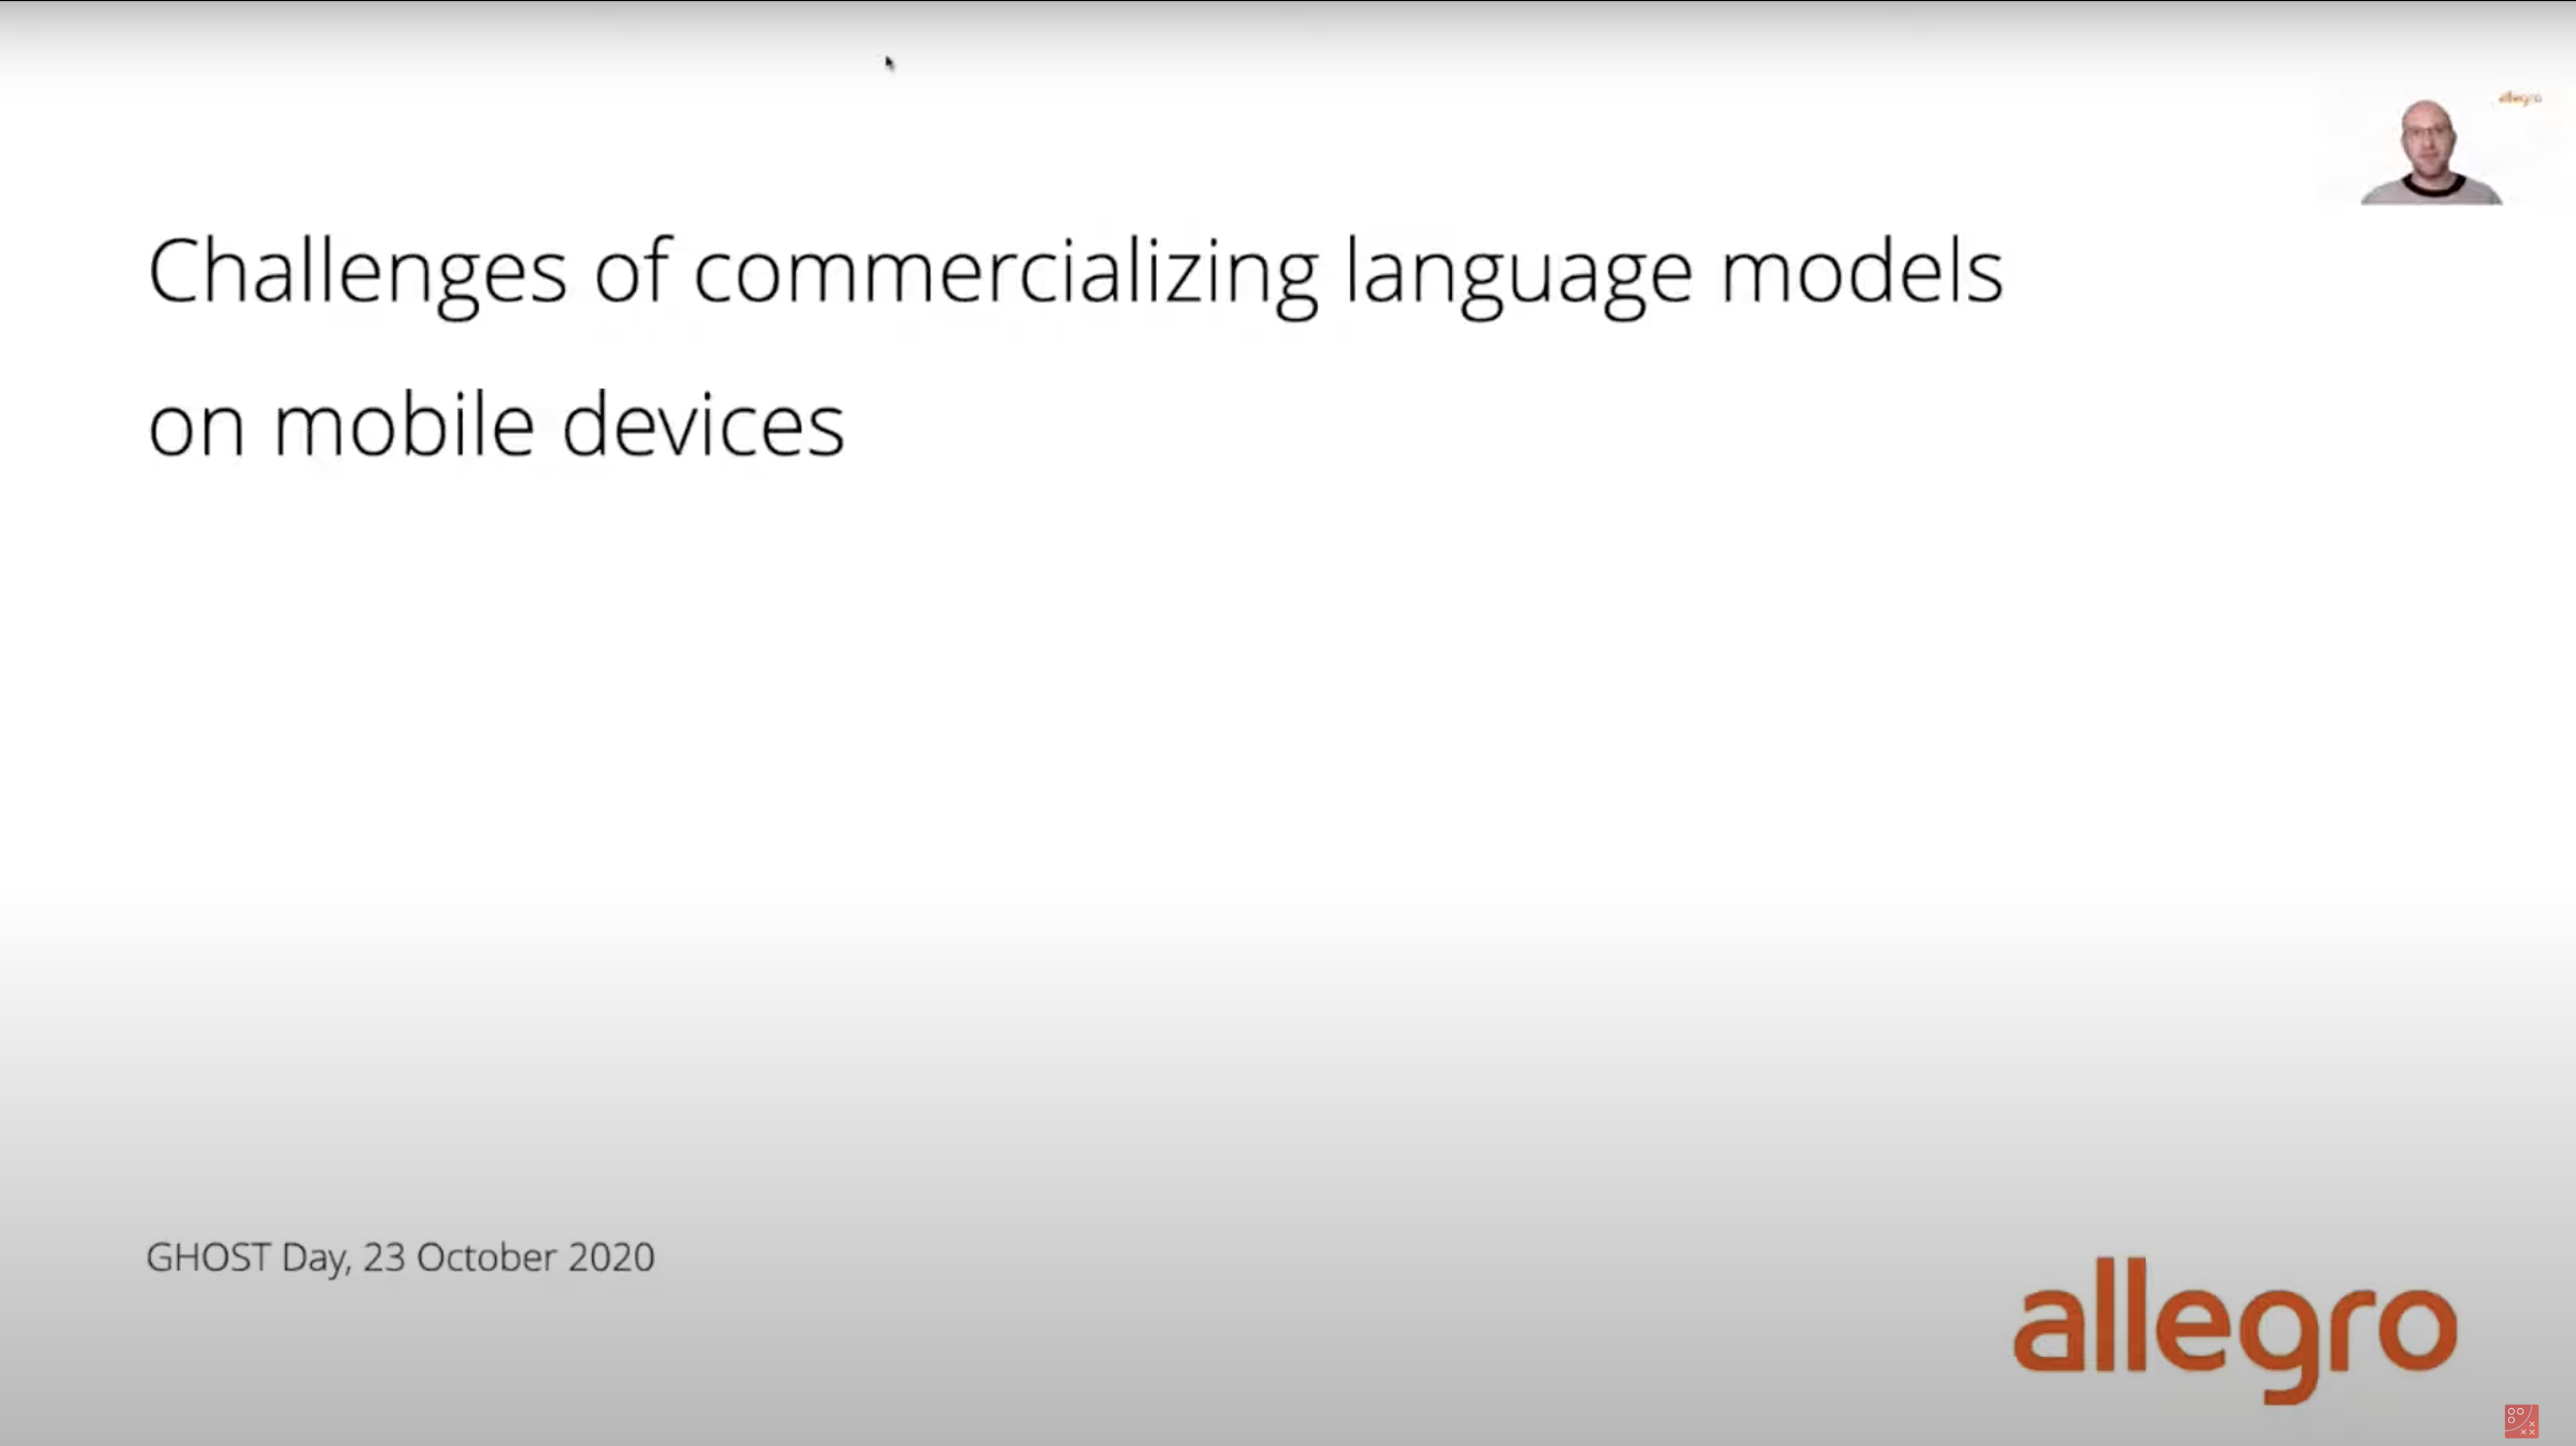 Challenges of commercializing language models on mobile devices